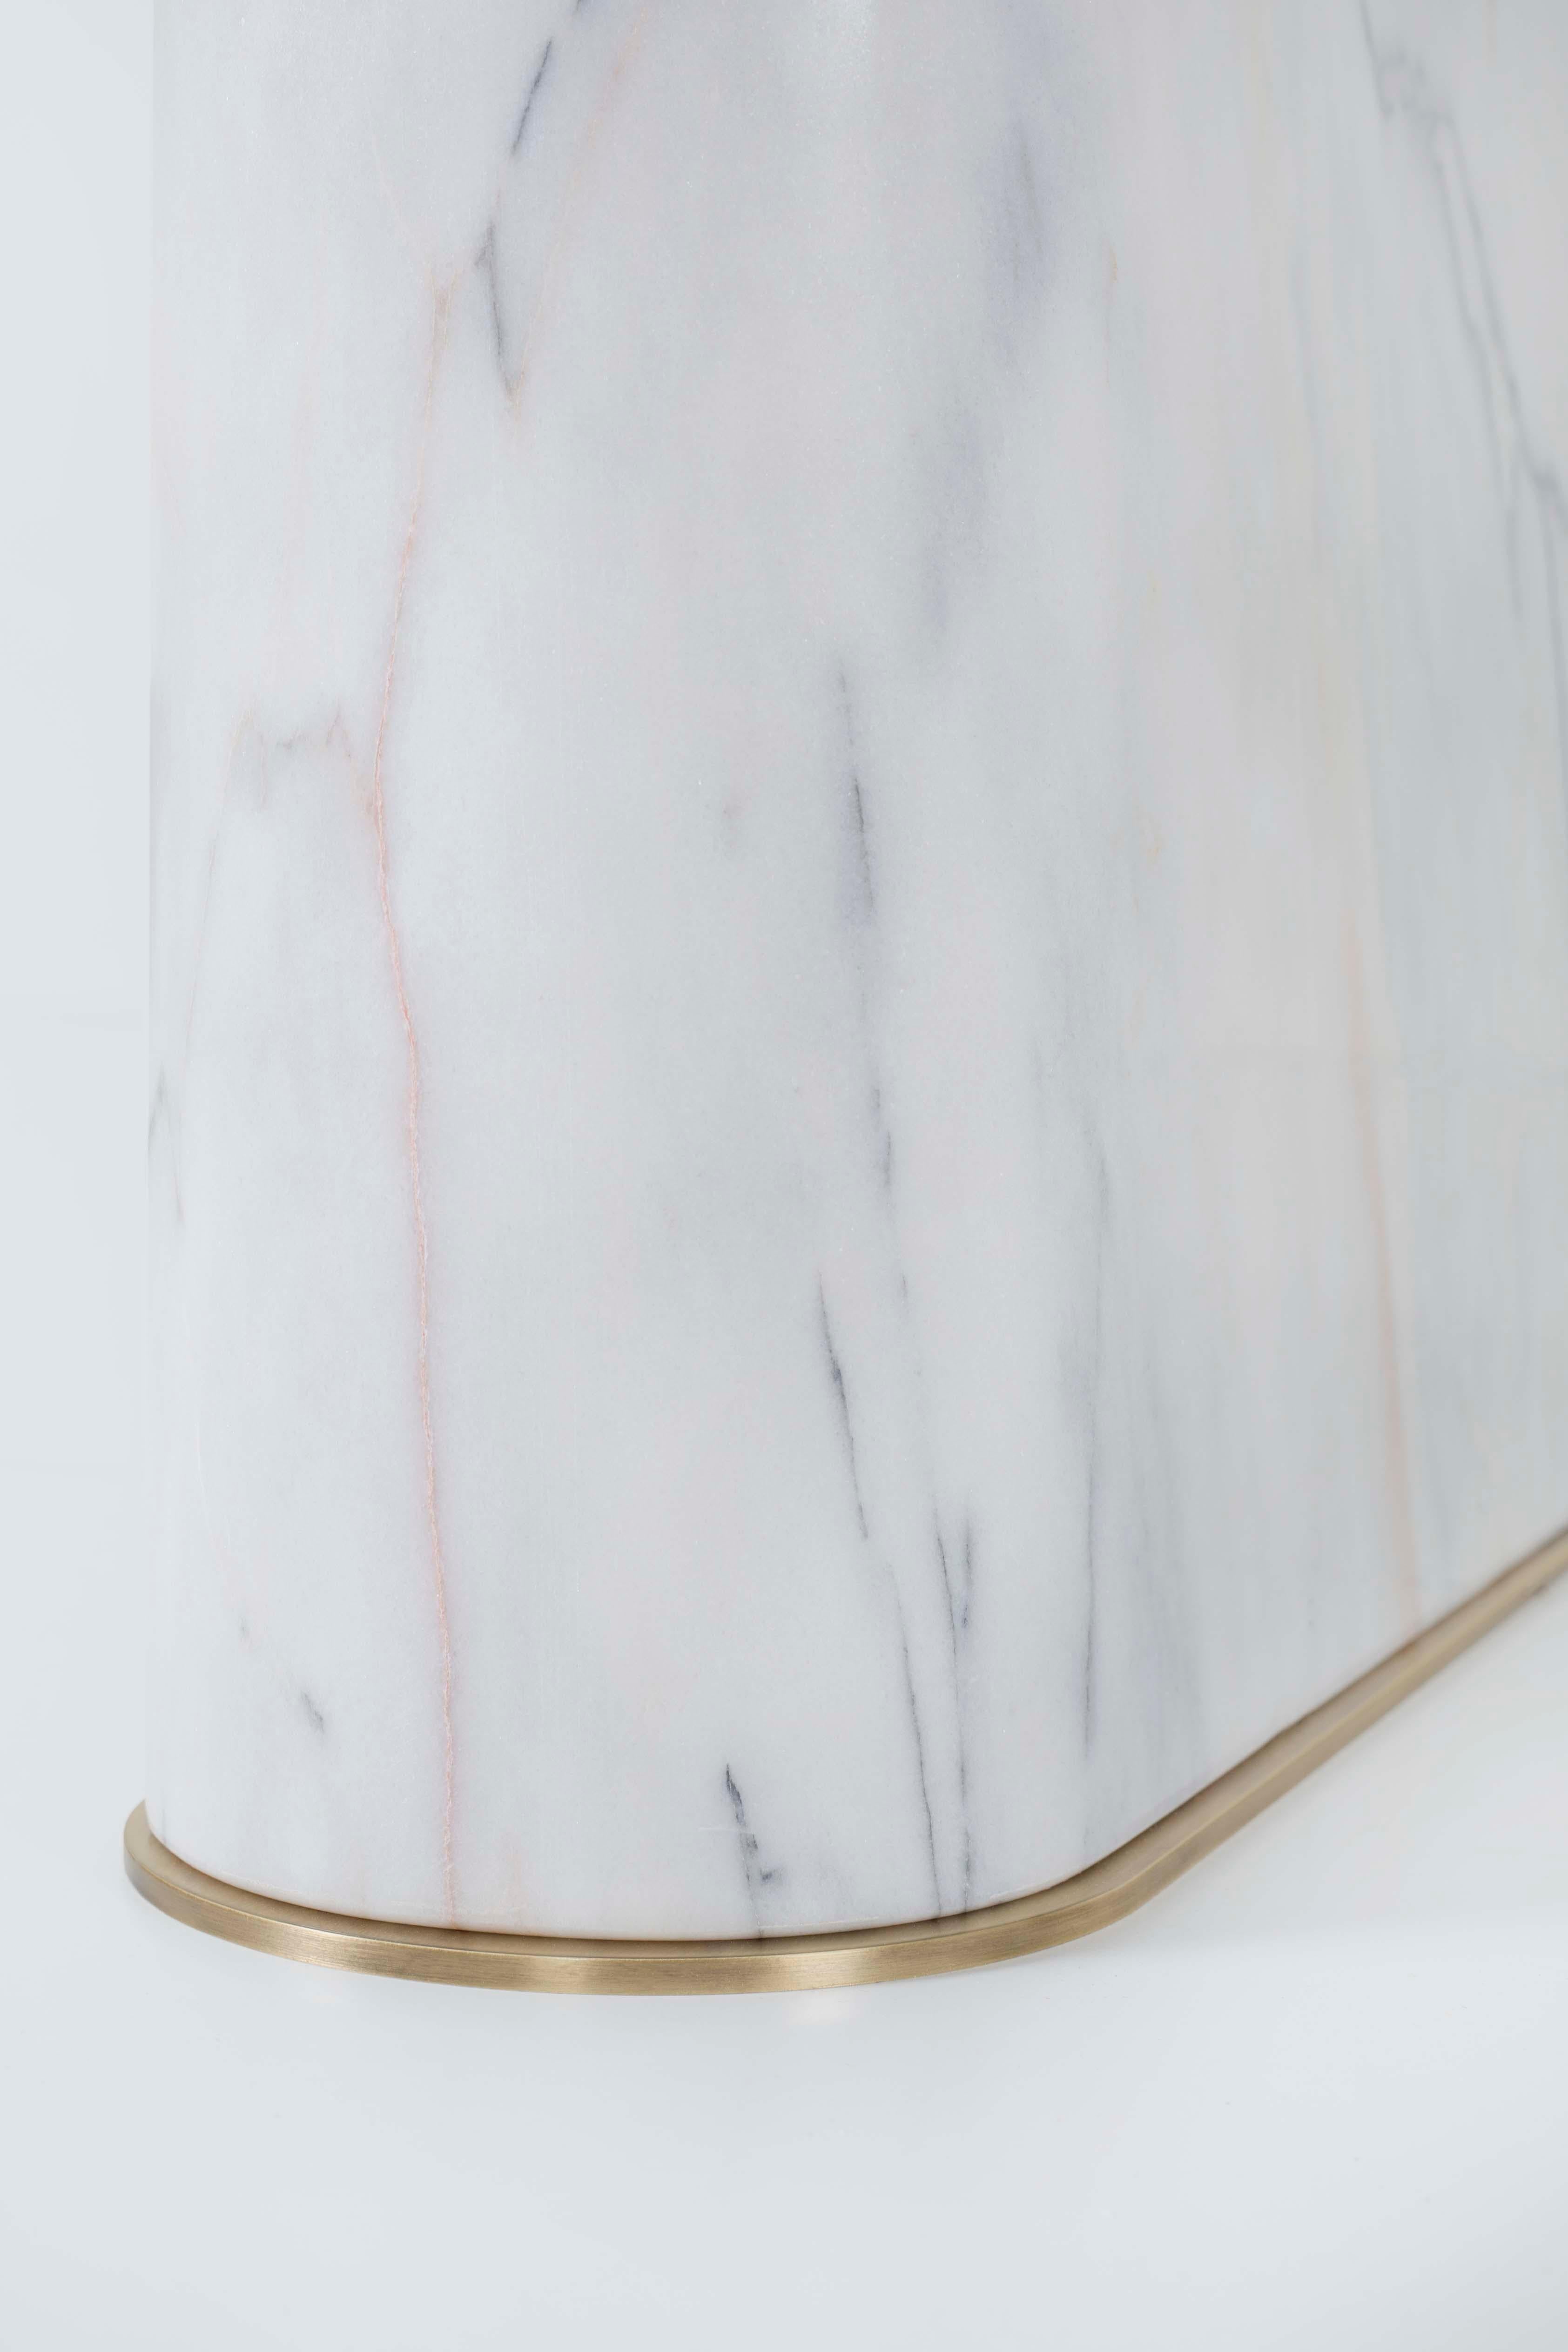 Modern Fall Dining Table Calacatta Marble Handmade in Portugal by Greenapple For Sale 2